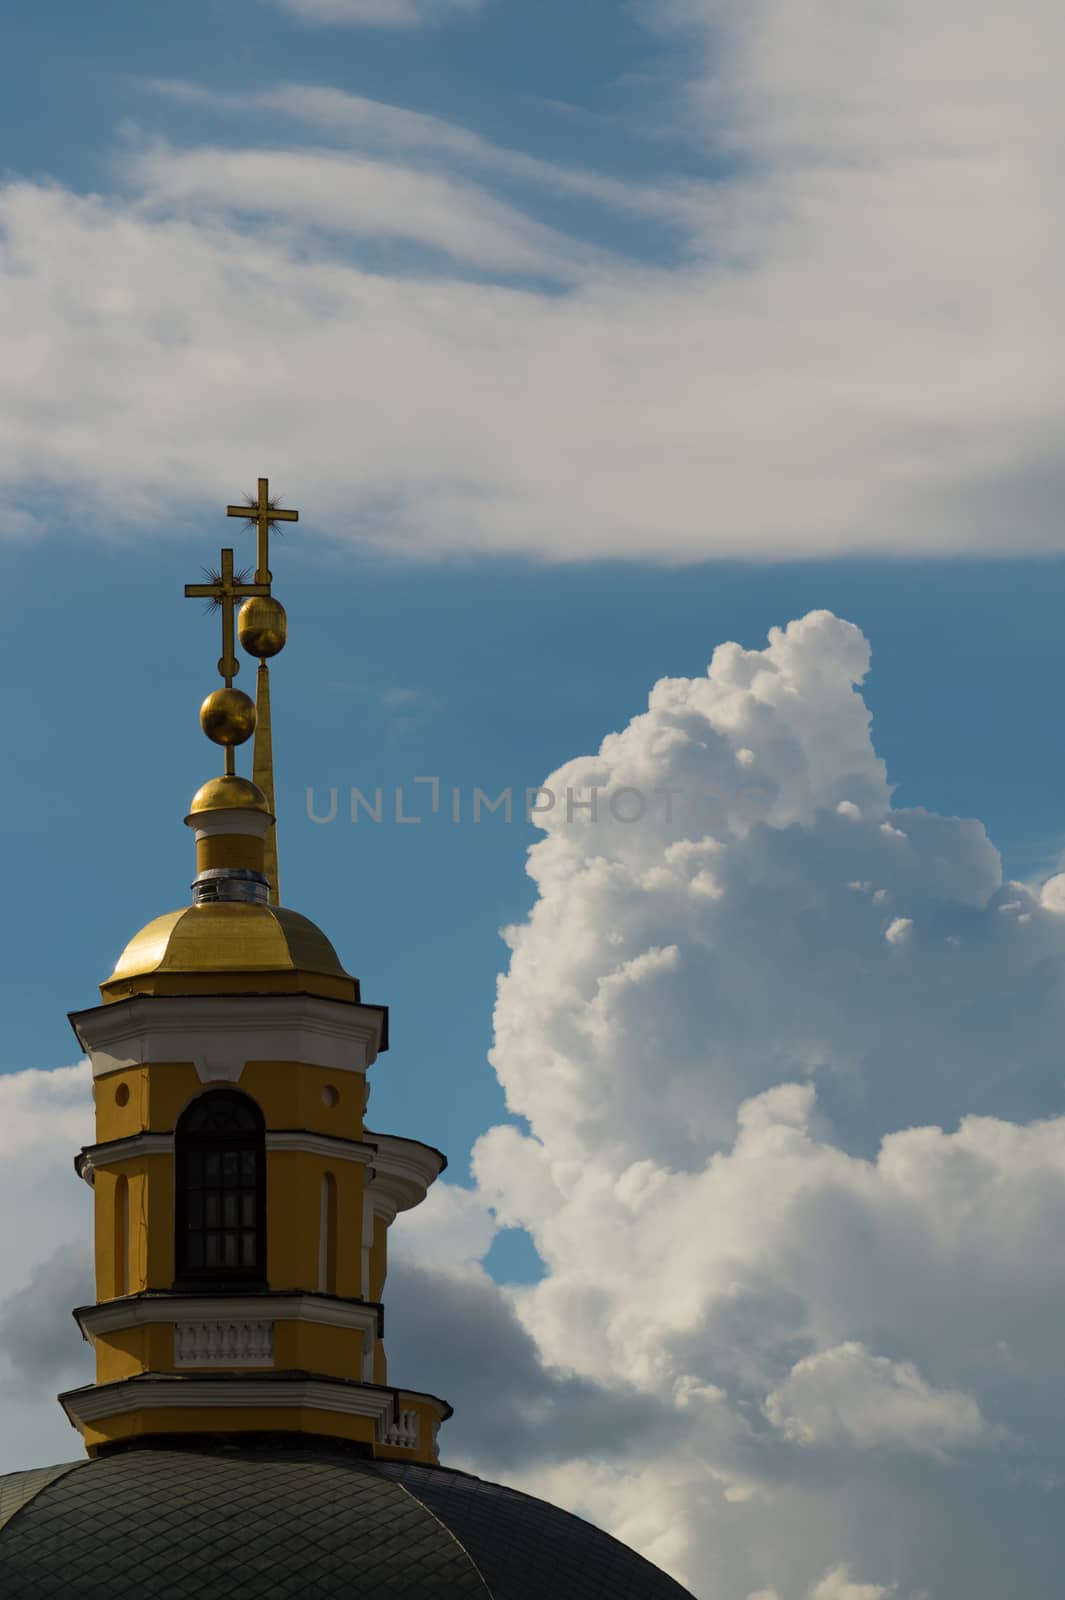 a yellow dome of a christian church against a blue sky with invasive clouds. by alexsdriver